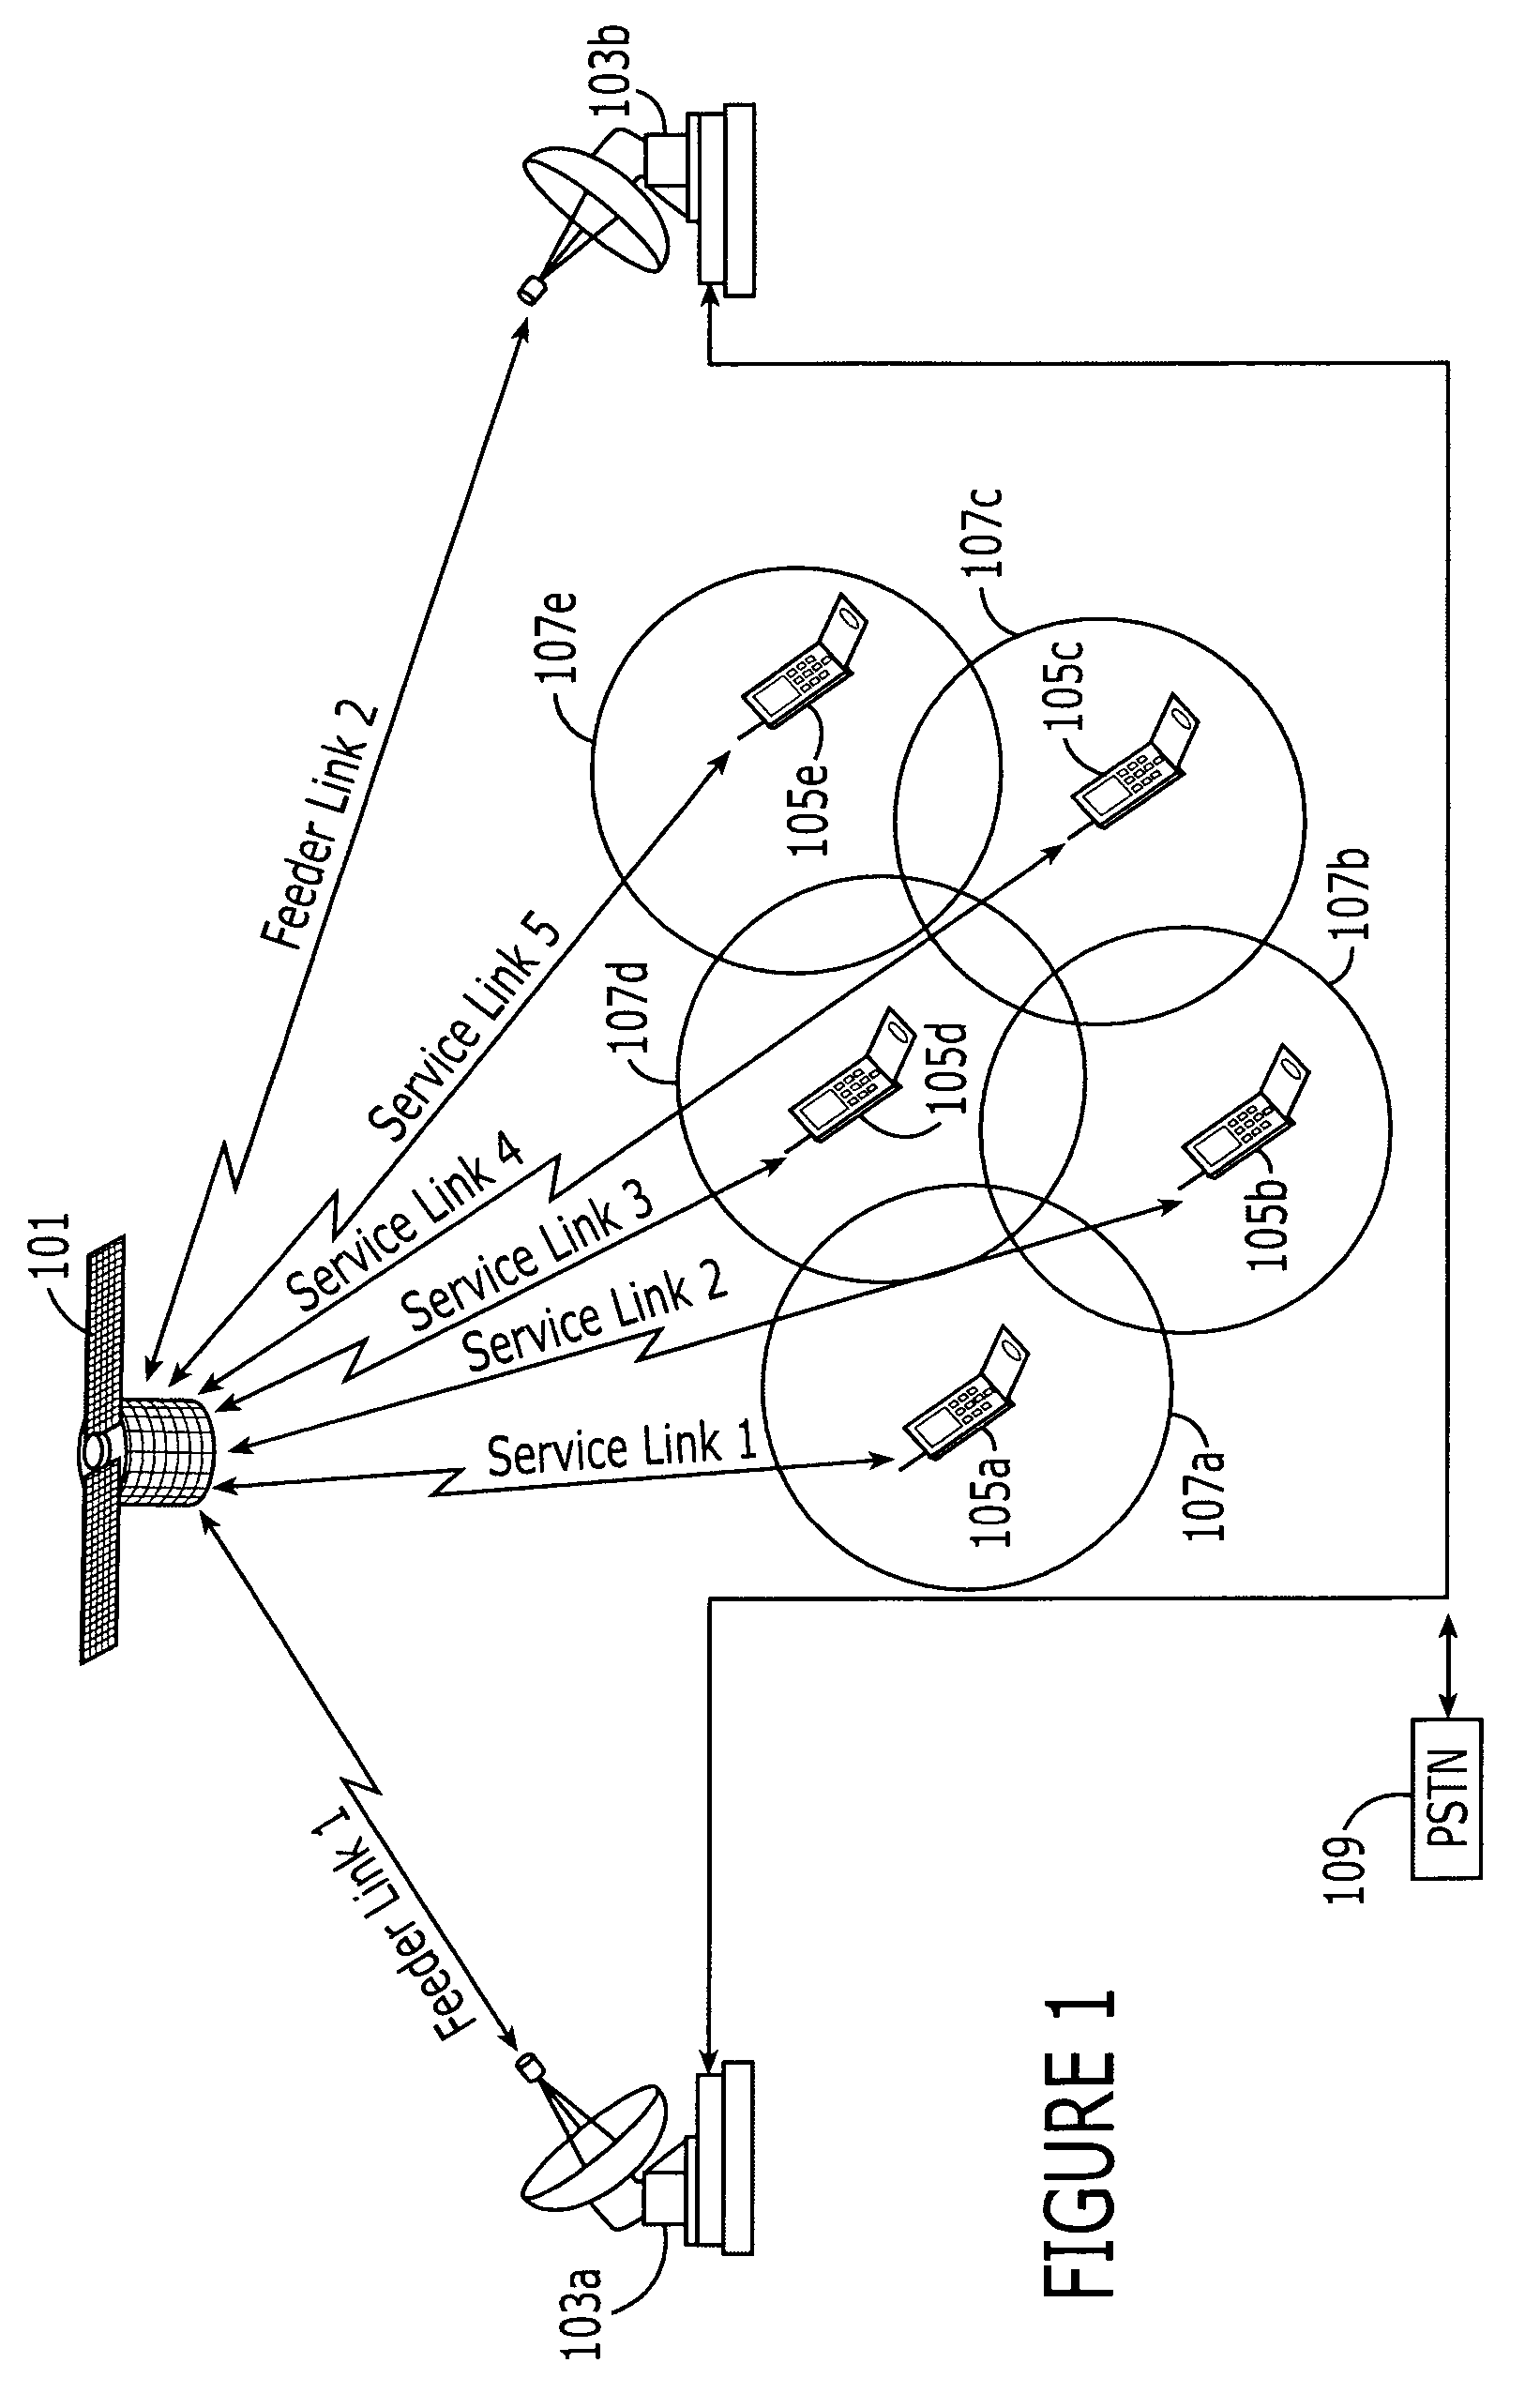 Methods of ground based beamforming and on-board frequency translation and related systems